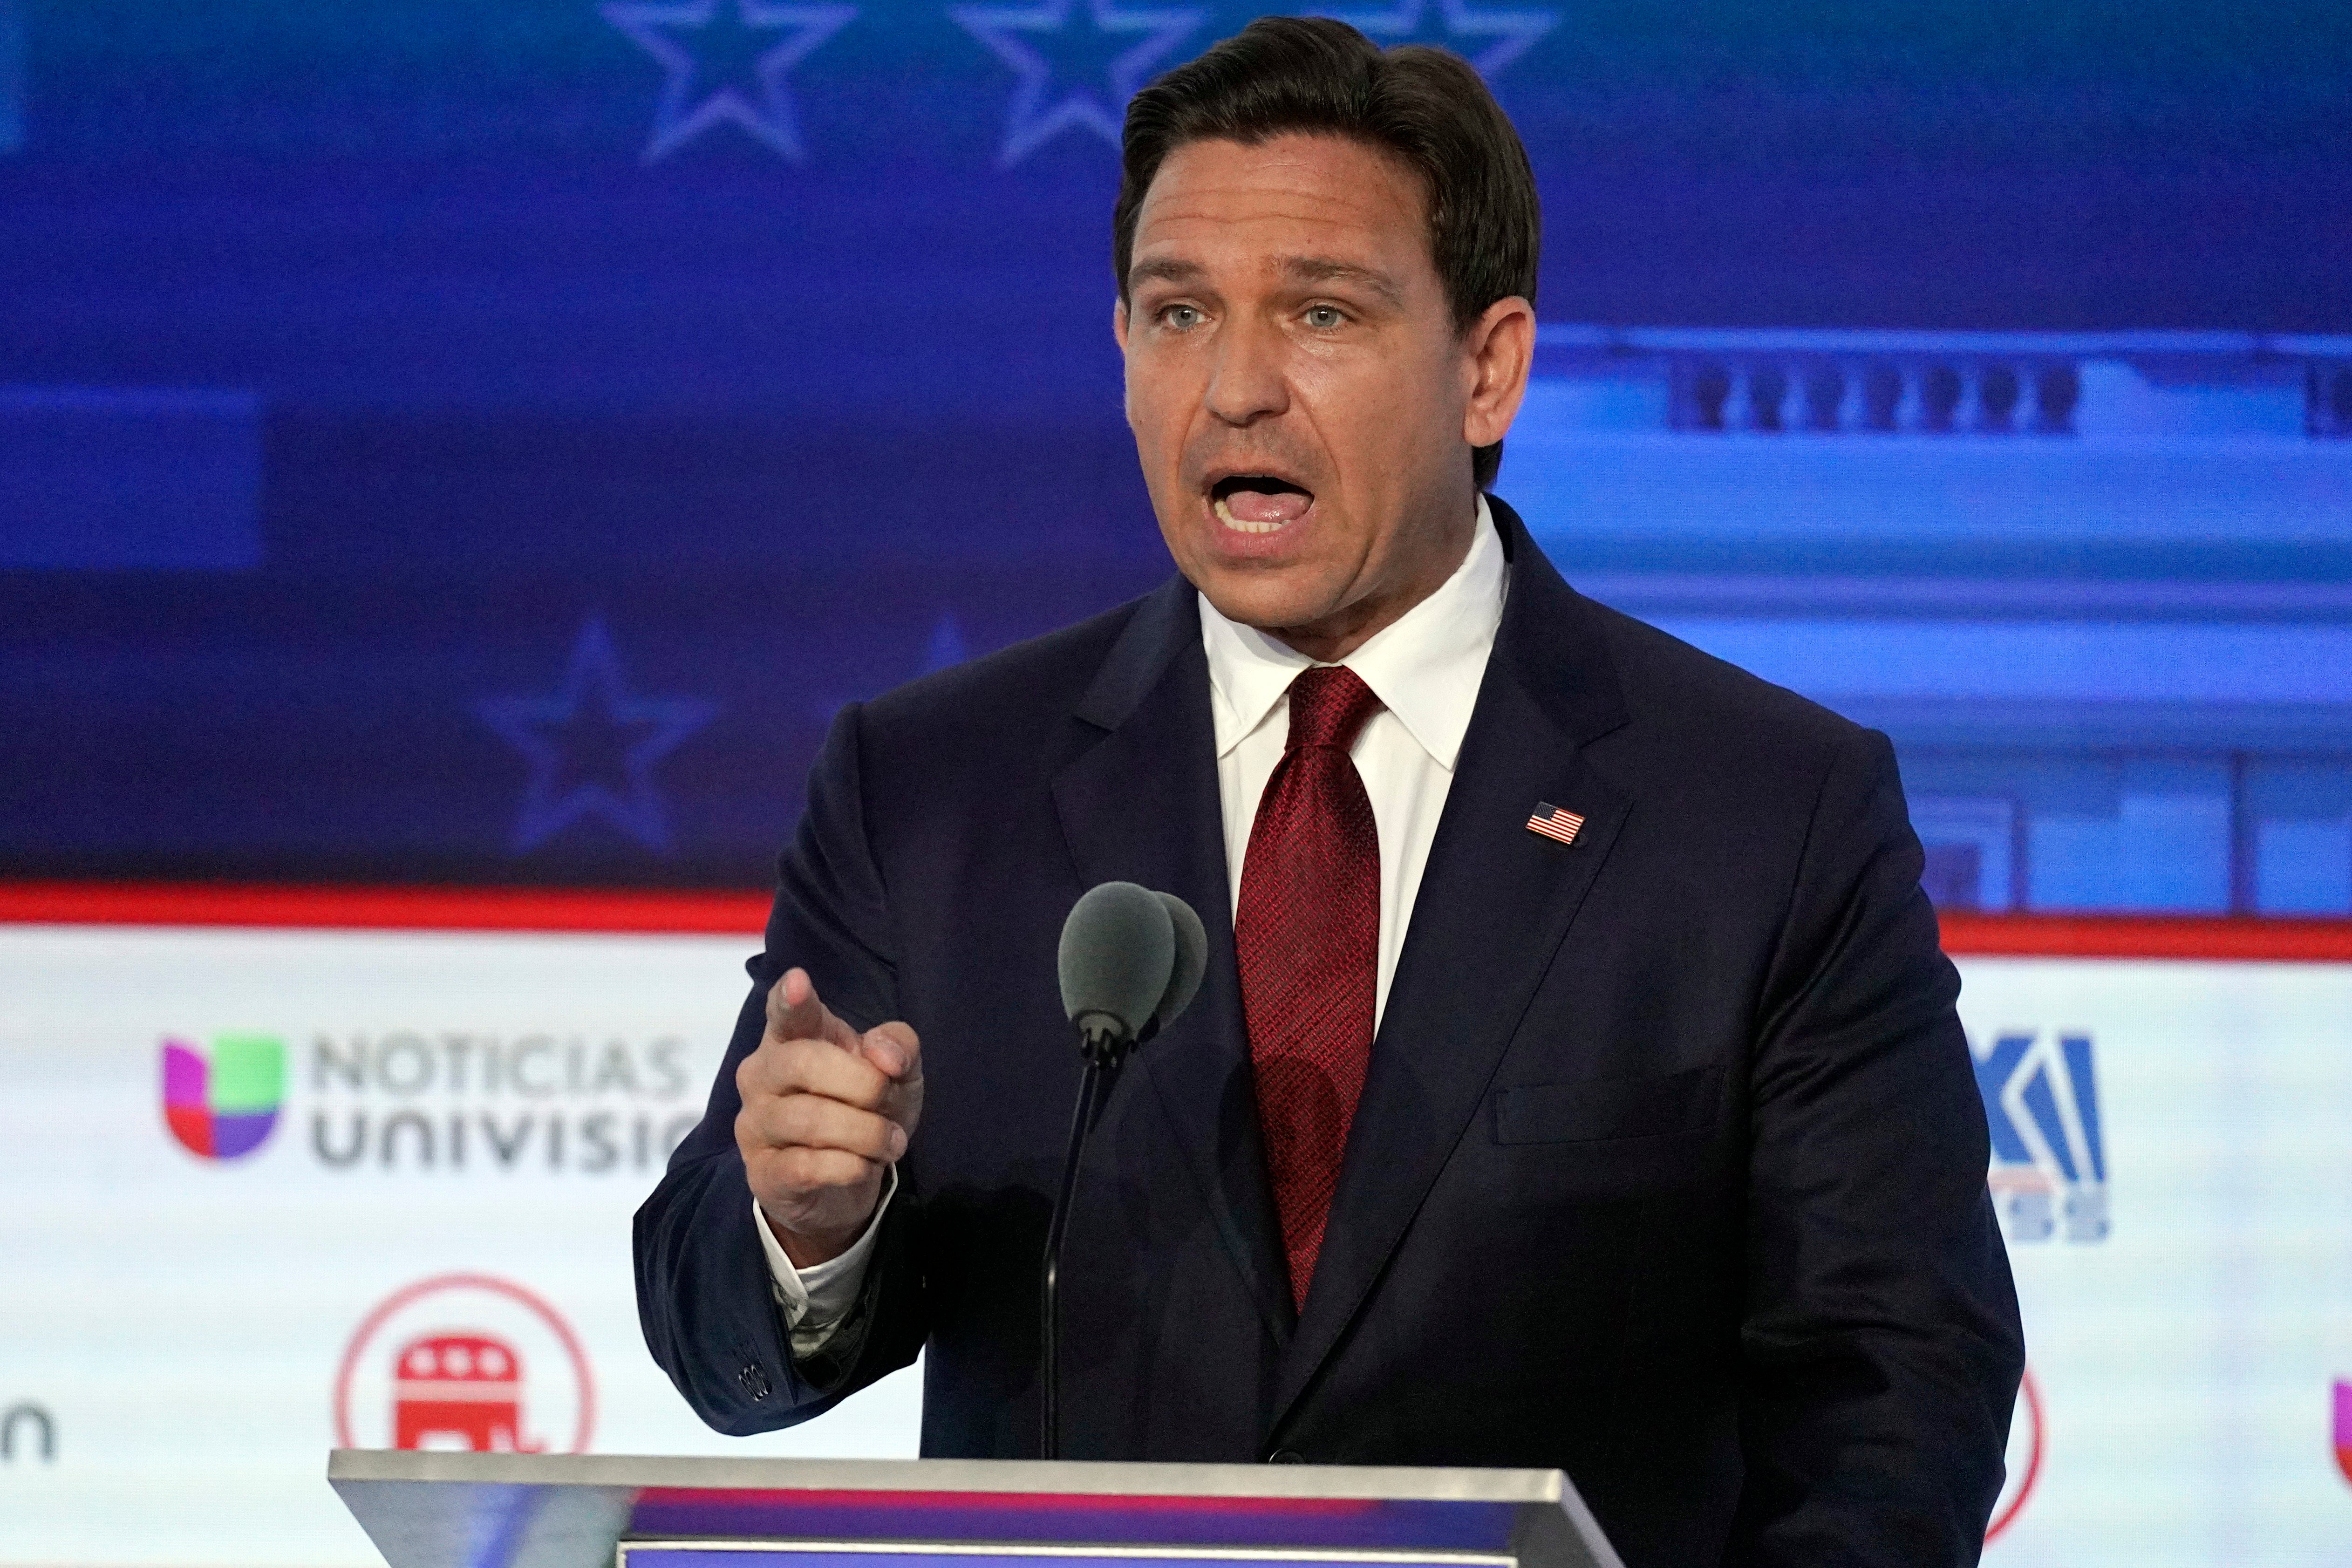 Ron DeSantis has said he would not serve as Donald Trump’s Vice President if asked